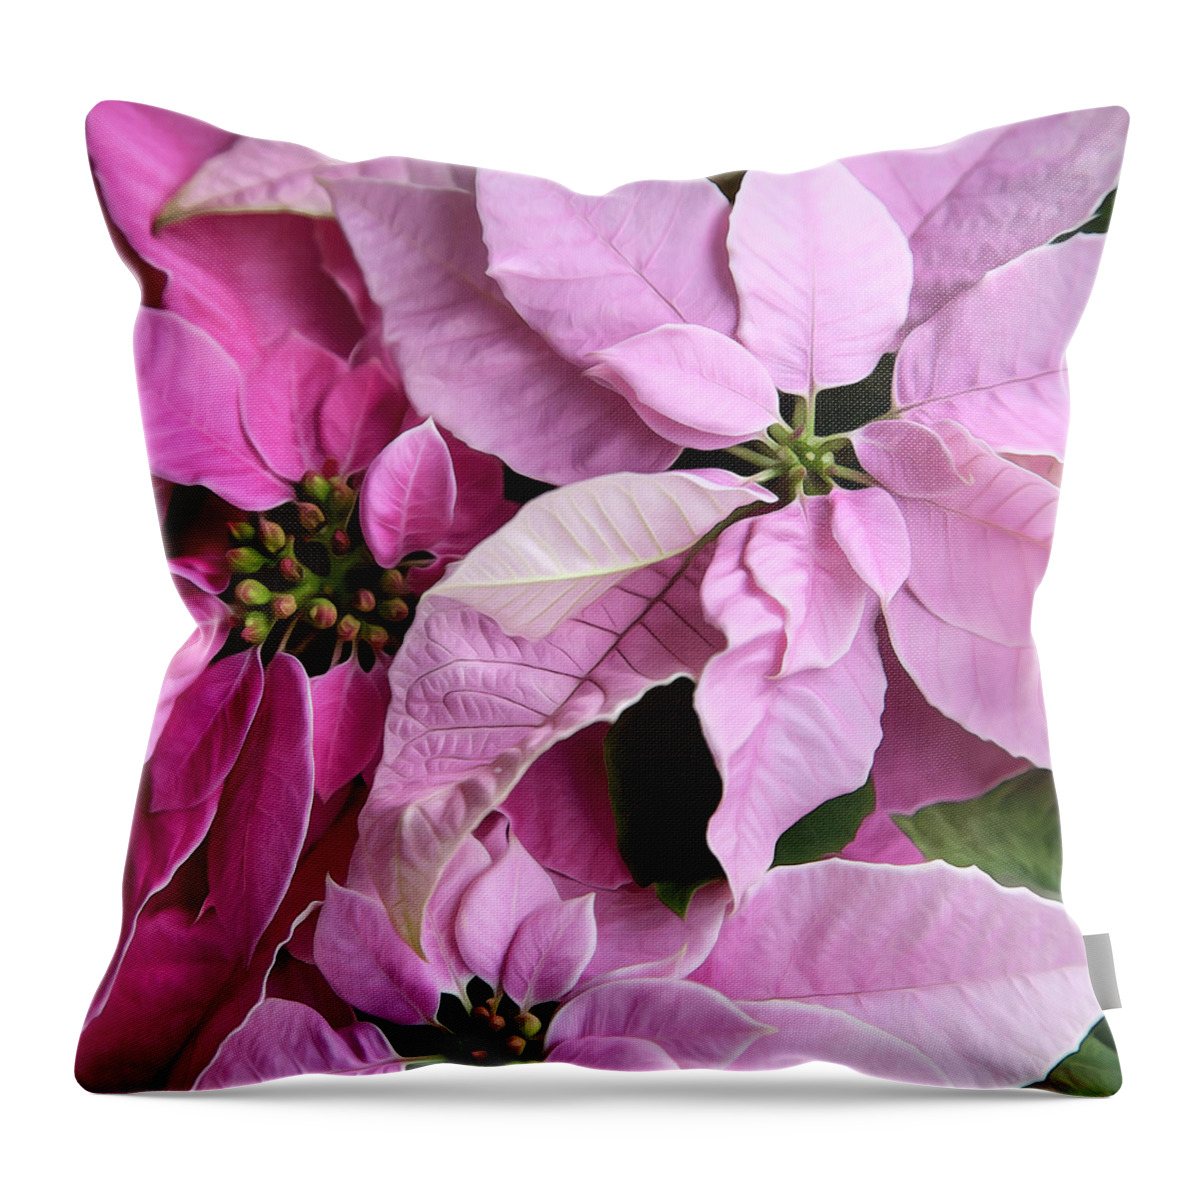 Face Mask Throw Pillow featuring the photograph Pink Poinsettias Square Format by Theresa Tahara